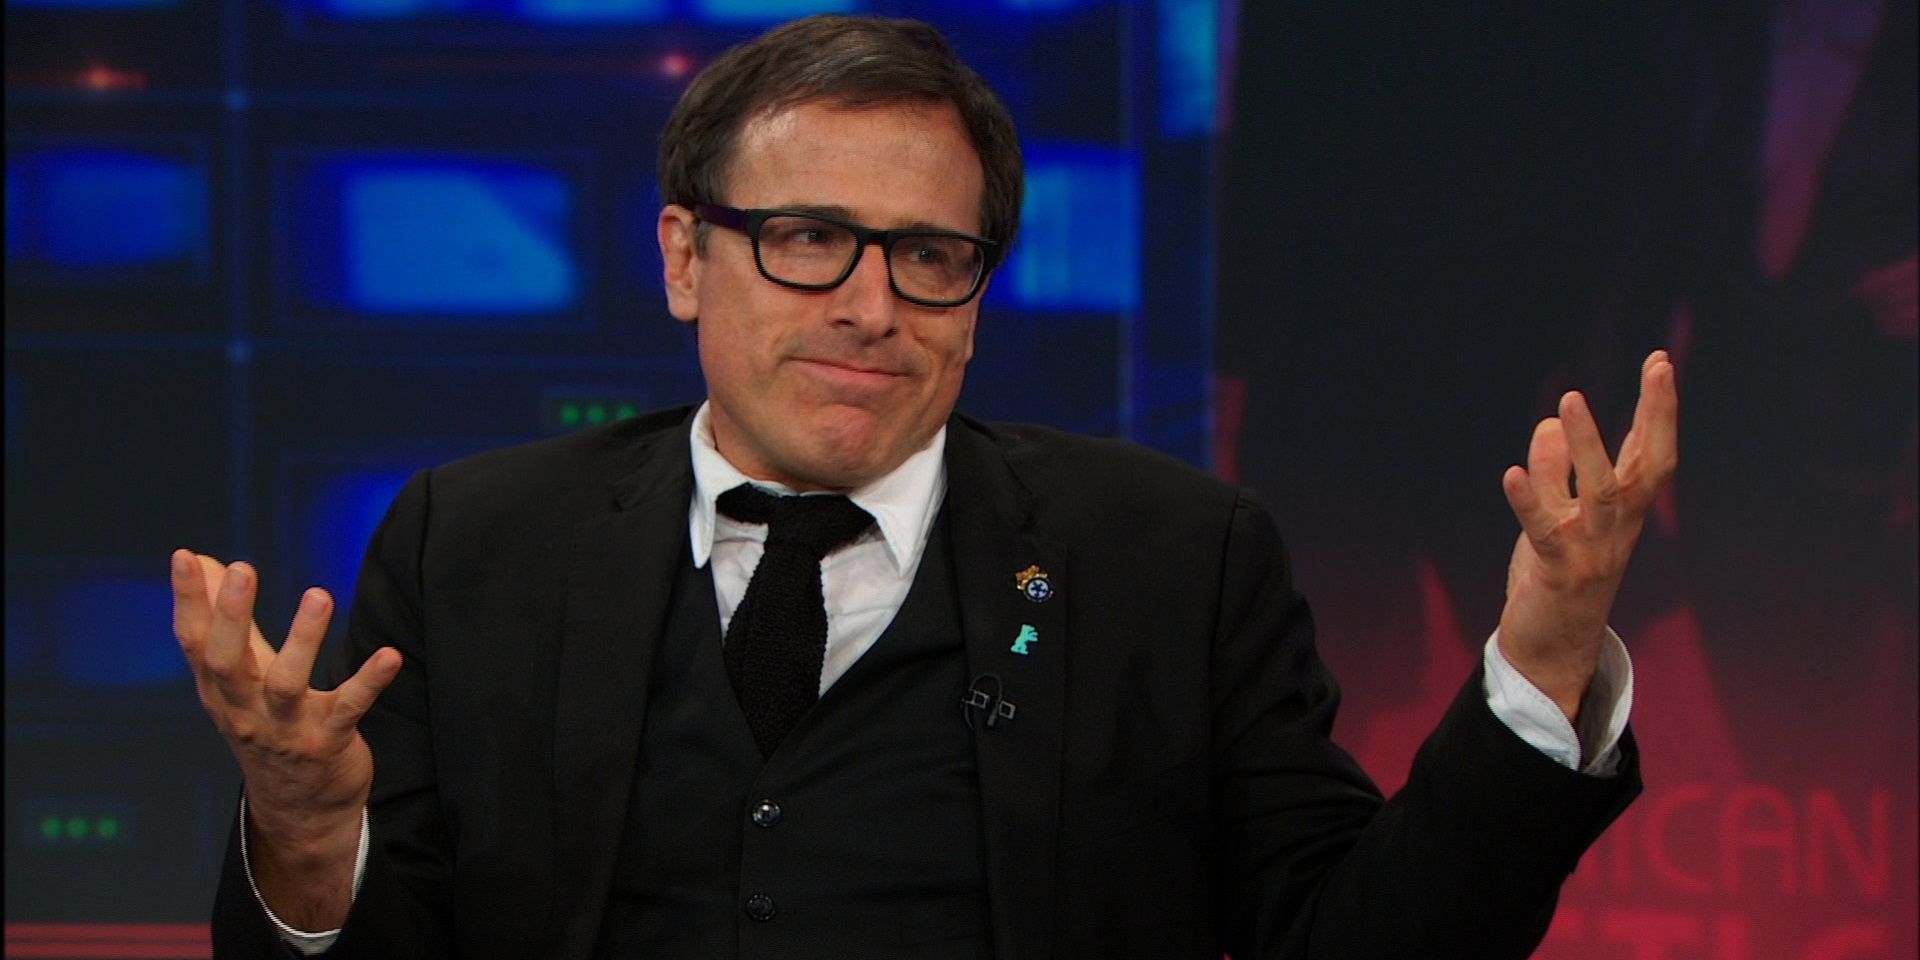 David O Russell on the Daily Show